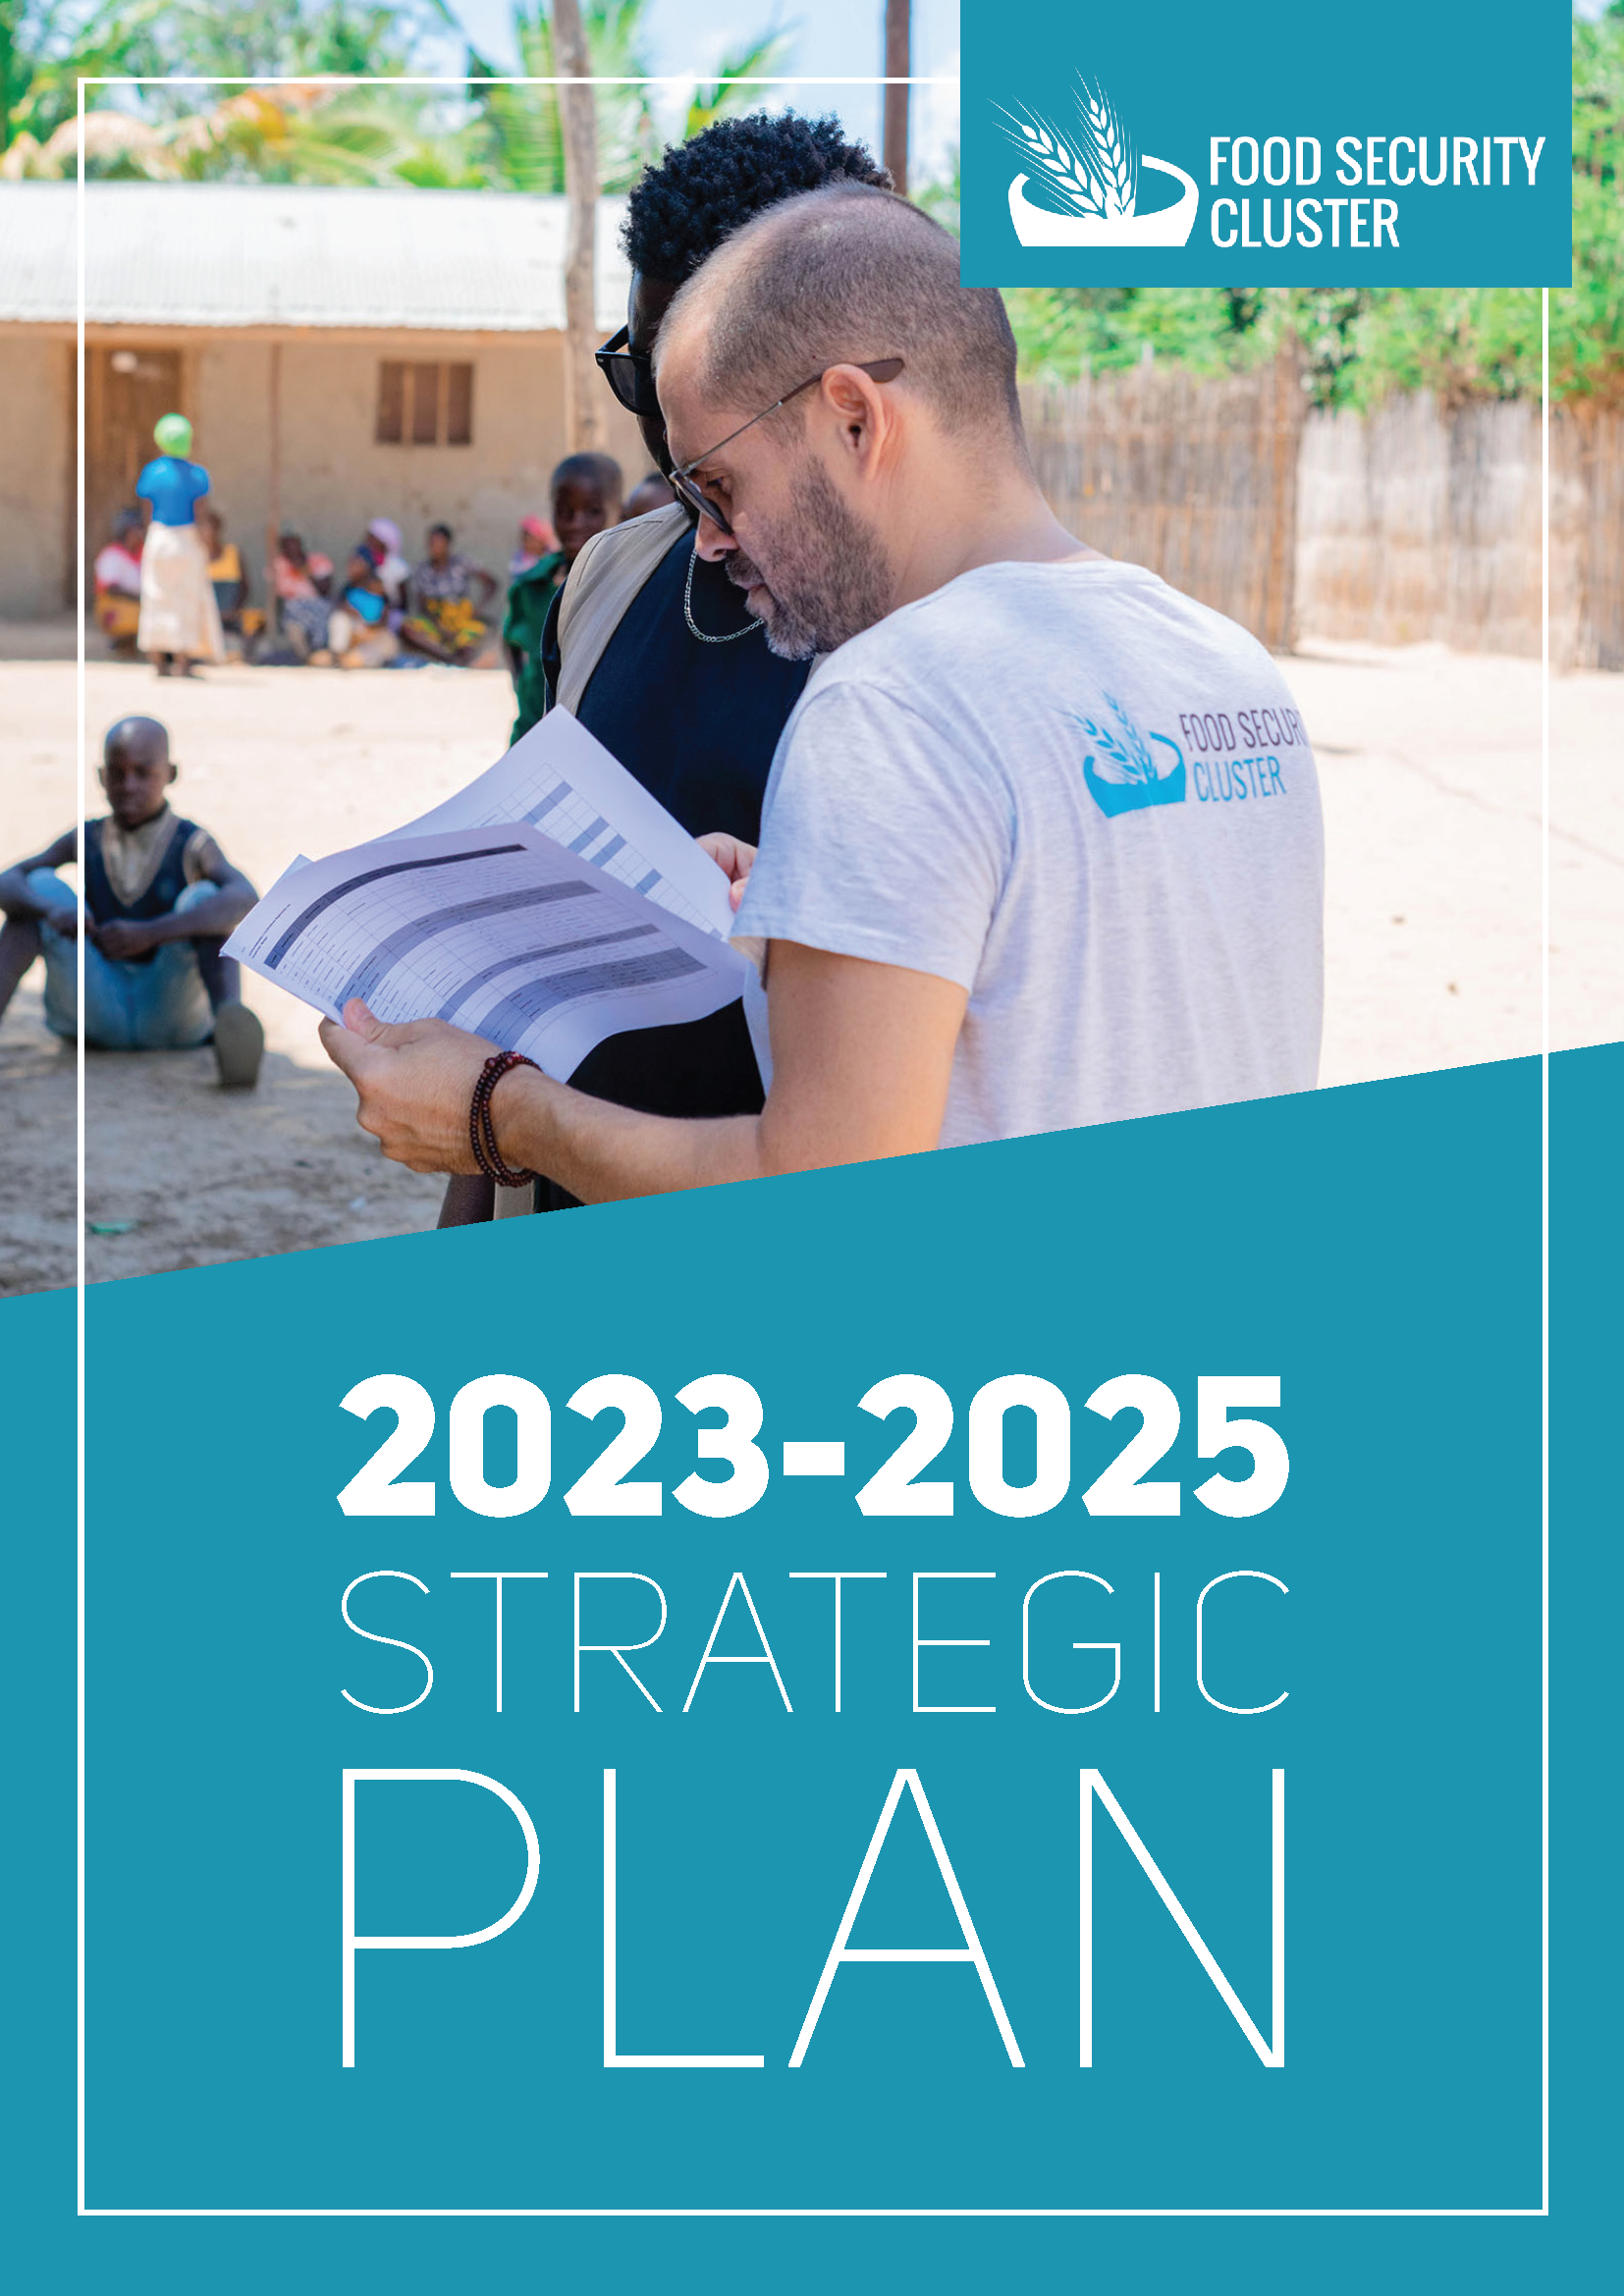 Cover page for Food Security Cluster 2023-2025 Strategic Plan